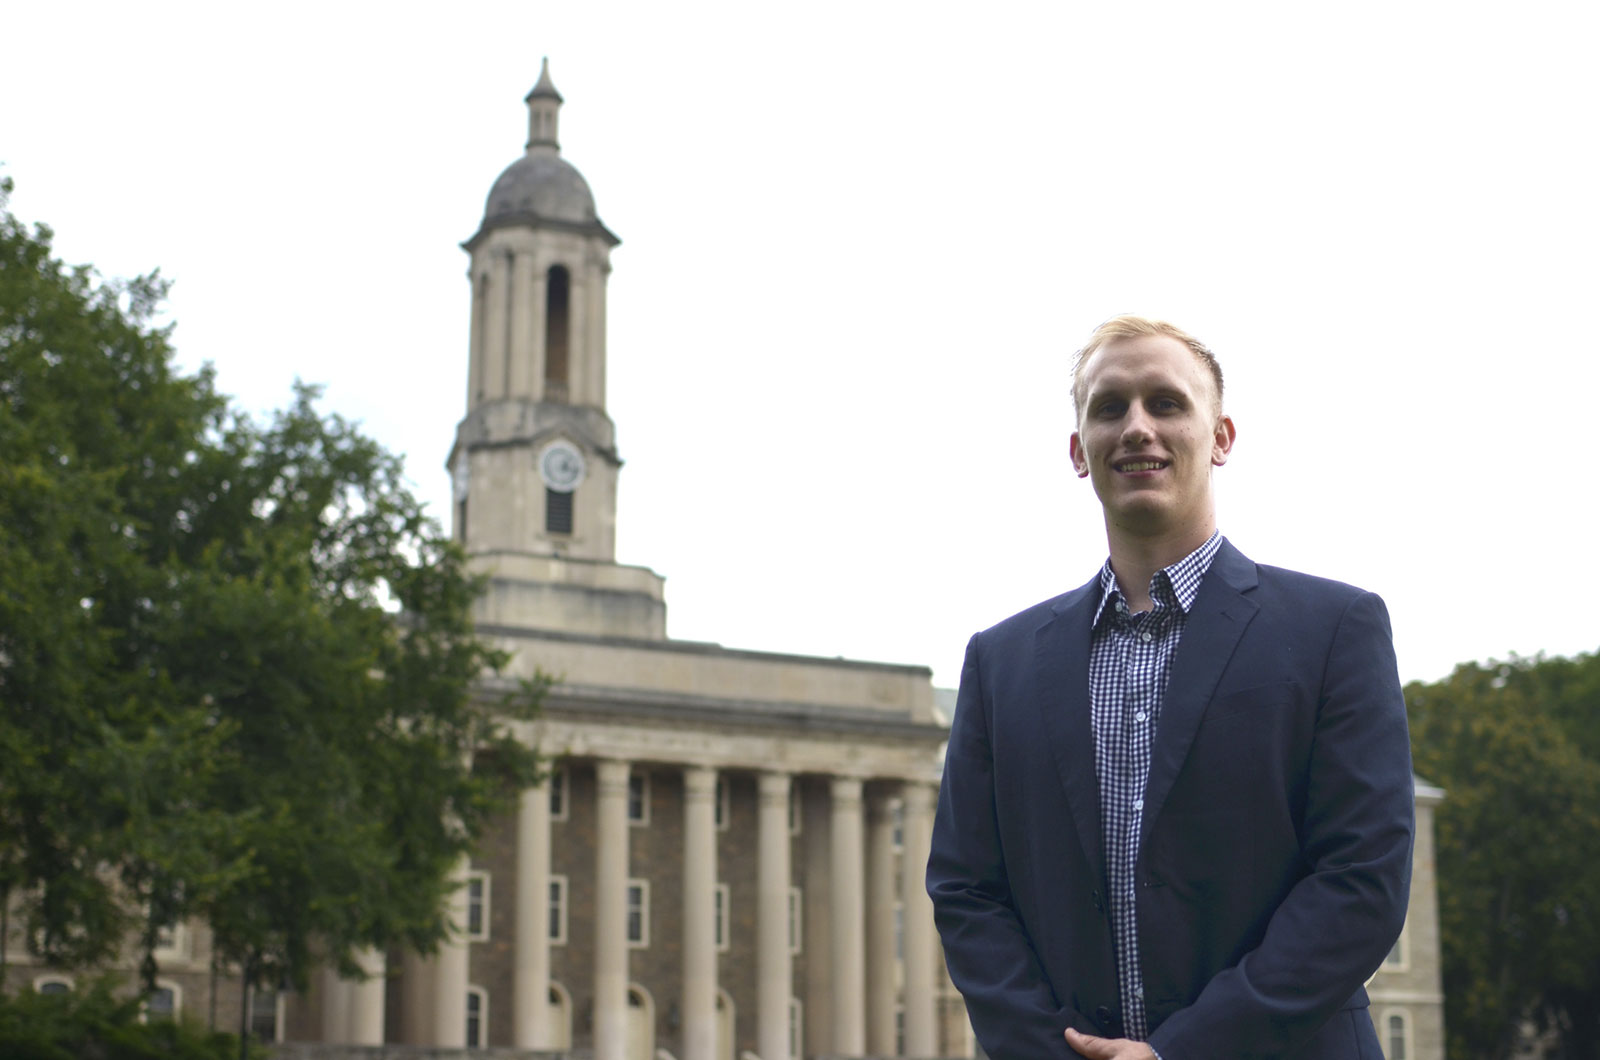 Scott Graupensperger is pictured wearing a suit jacket and collared shirt, standing in front of Penn State's Old Main building in State College, PA.